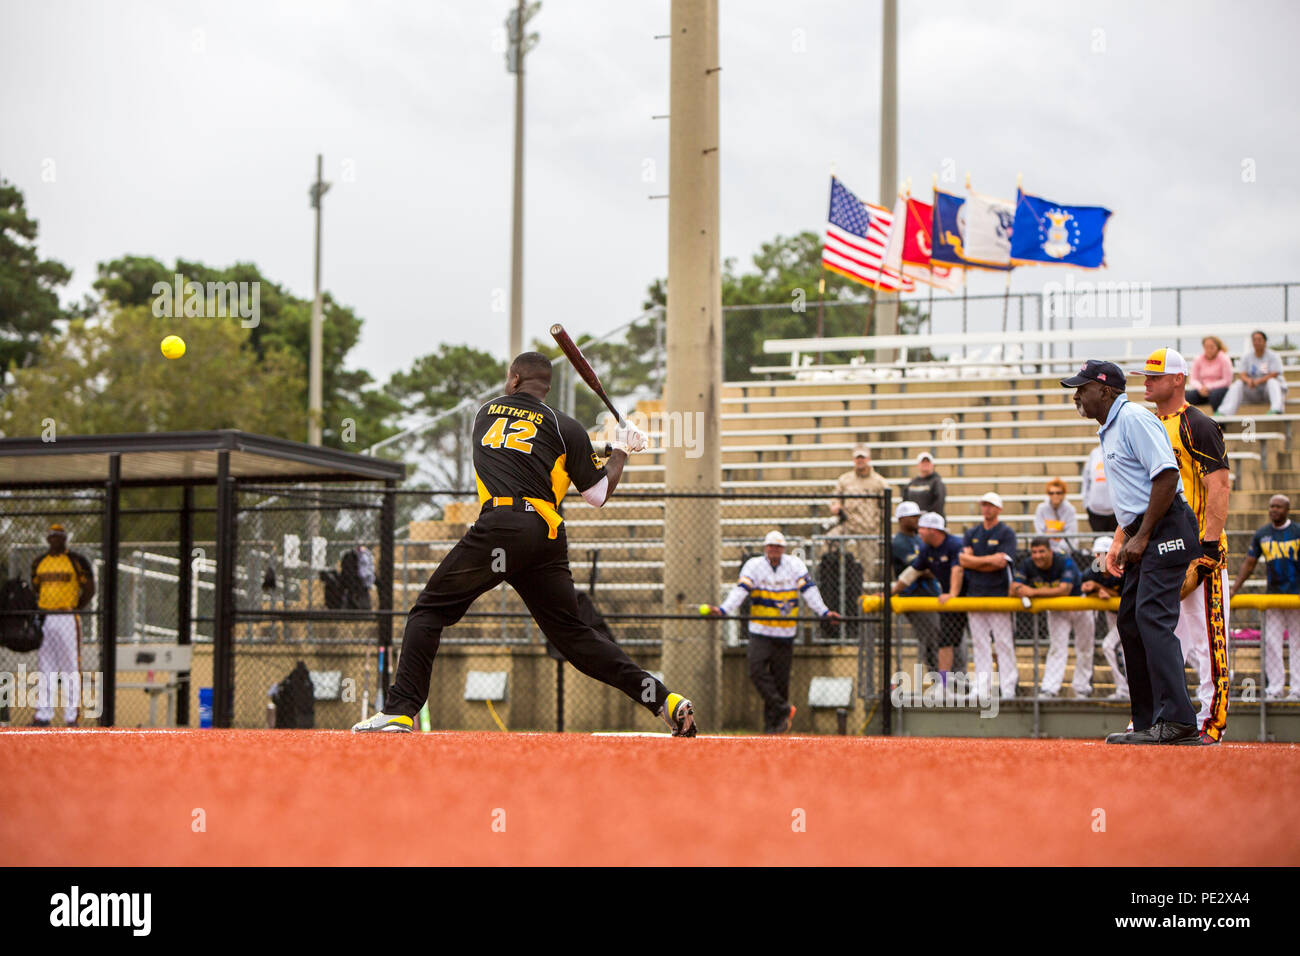 U.S. Army Spc. Jedon Matthews, an infielder for the U.S. Army men's softball team, prepares to swing during the 2015 Armed Forces Softball Tournament at the Harry Agganis Softball Field on Camp Lejeune, N.C., Sept. 24, 2015. 160 athletes representing the U.S. Army, Marine Corps, Navy, and Air Force competed during a weeklong softball tournament hosted by Marine Corps Community Services. (U.S. Marine Corps photo by Sgt. Christopher Q. Stone, MCIEAST-MCB CAMLEJ Combat Camera/Released) Stock Photo